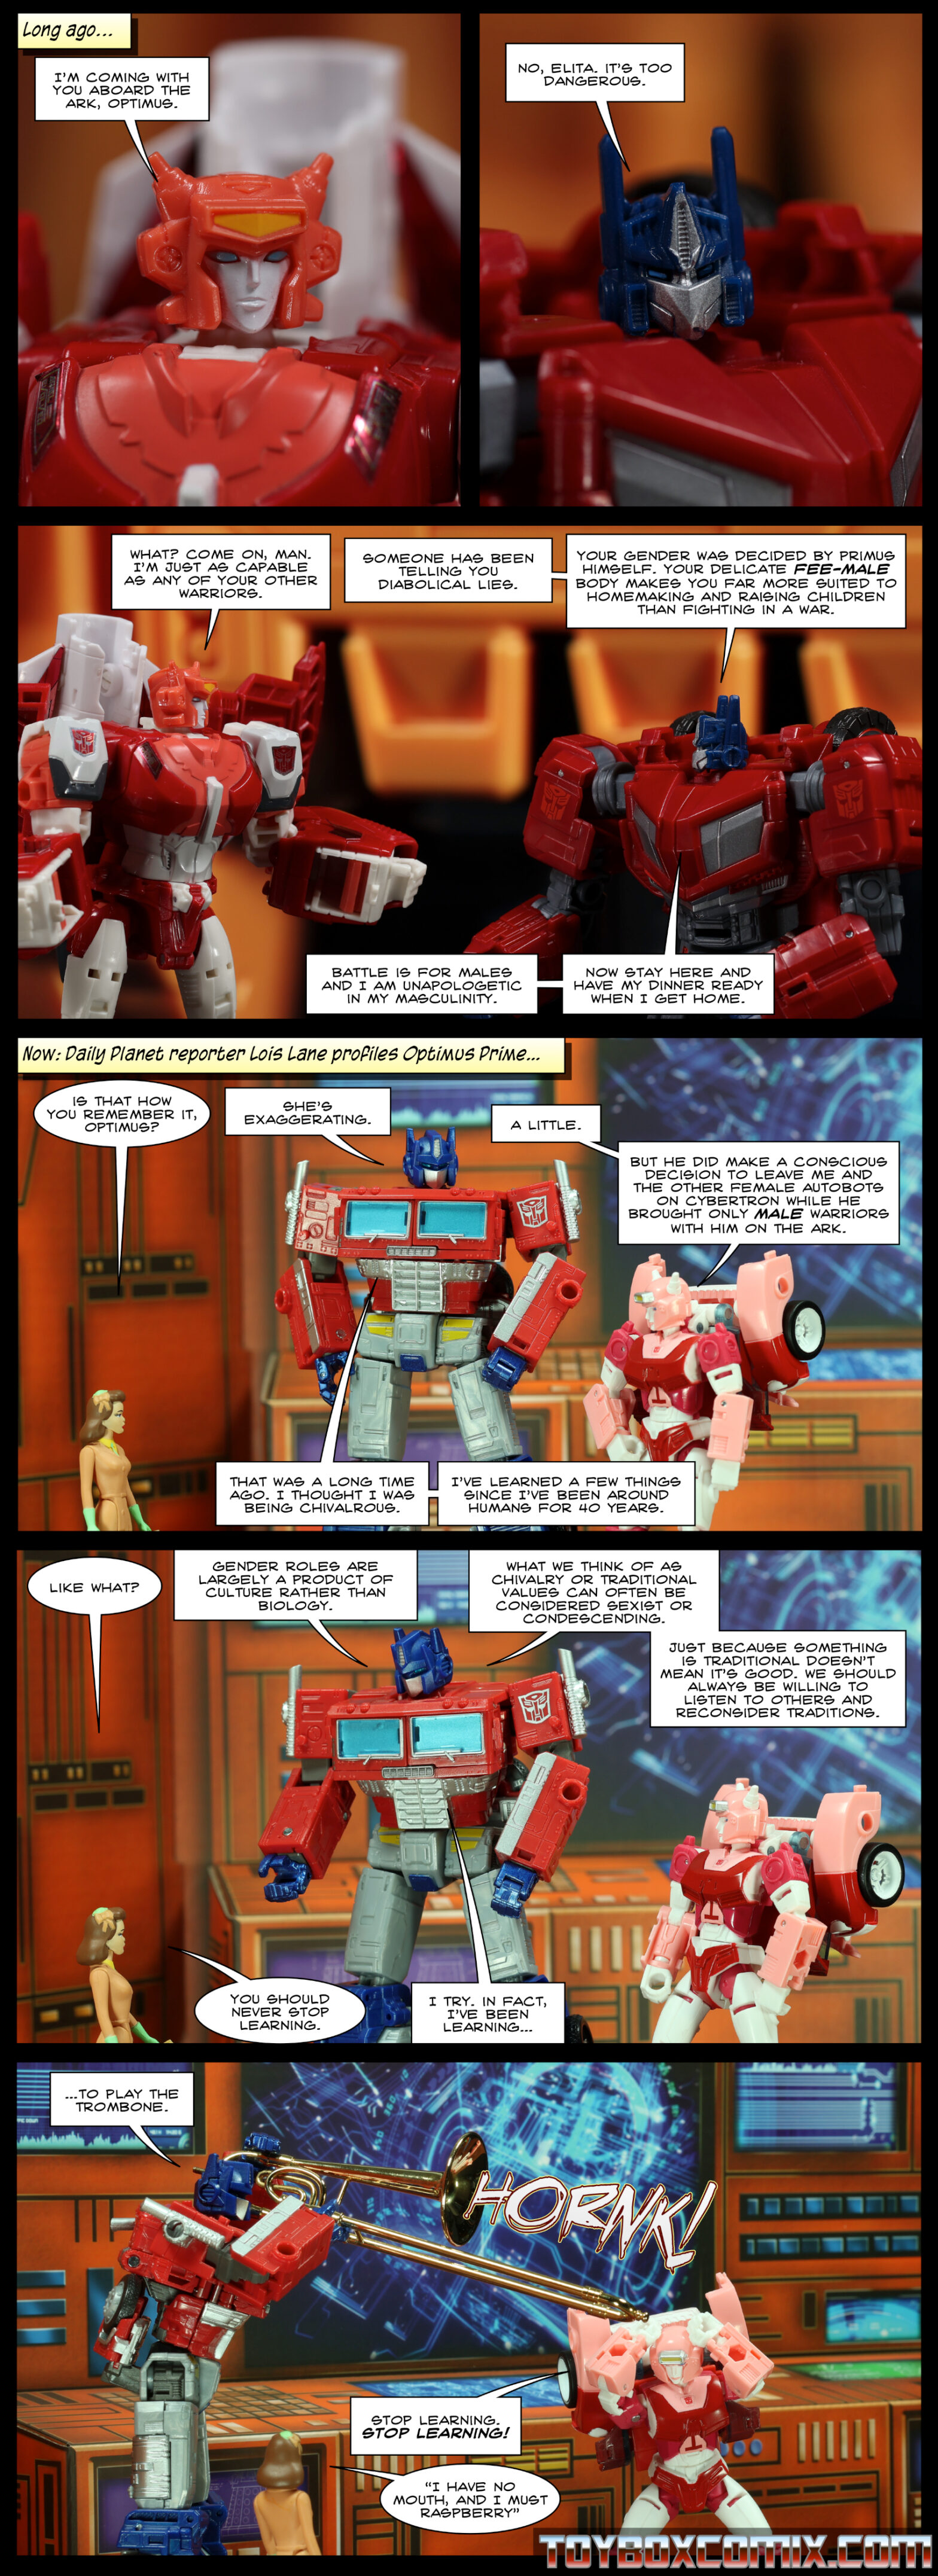 Panel 1: Caption: “Long ago…” Elita-1 (Cybertronian): “I’m coming with you aboard the Ark, Optimus.” 2: Optimus Prime (Cybertronian): “No, Elita. It’s too dangerous.” 3: Elita: “What? Come on, man. I’m just as capable as any of your other warriors.” Optimus: “Someone has been telling you diabolical lies. Your gender makes was decided by Primus himself. Your delicate fee-male body makes you far more suited to homemaking and raising children than fighting a war. Battle is for males and I am unapologetic in my masculinity. Now stay here and have my dinner ready when I get home.” 4: Caption: “Now: Daily Planet reporter Lois Lane profiles Optimus Prime…” Lois: “Is that how you remember it, Optimus?” Optimus: “She’s exaggerating.” Elita: “A little. But he did make a conscious decision to leave me and the other female Autobots on Cybertron while he brought only male warriors with him on the ark.” Optimus: “That was a long time ago. I thought I was being chivalrous. I've learned a few things since I’ve been around humans for 40 years.” 5: Lois: “Like what?” Optimus: “Gender roles are largely a product of culture rather than biology. What we think of as chivalry or traditional values can often be considered sexist or condescending. Just because something is traditional doesn’t mean it’s good. We should always be willing to listen to others and reconsider traditions.” Lois: “You should never stop learning.” Optimus: “I try. In fact, I’ve been learning…” 6: Optimus: “…to play the trombone.” Optimus holds a trombone which goes HORNK! Elita, with her hands on her horns: “Stop learning! STOP LEARNING!” Lois: “I have no mouth, and I must raspberry.”